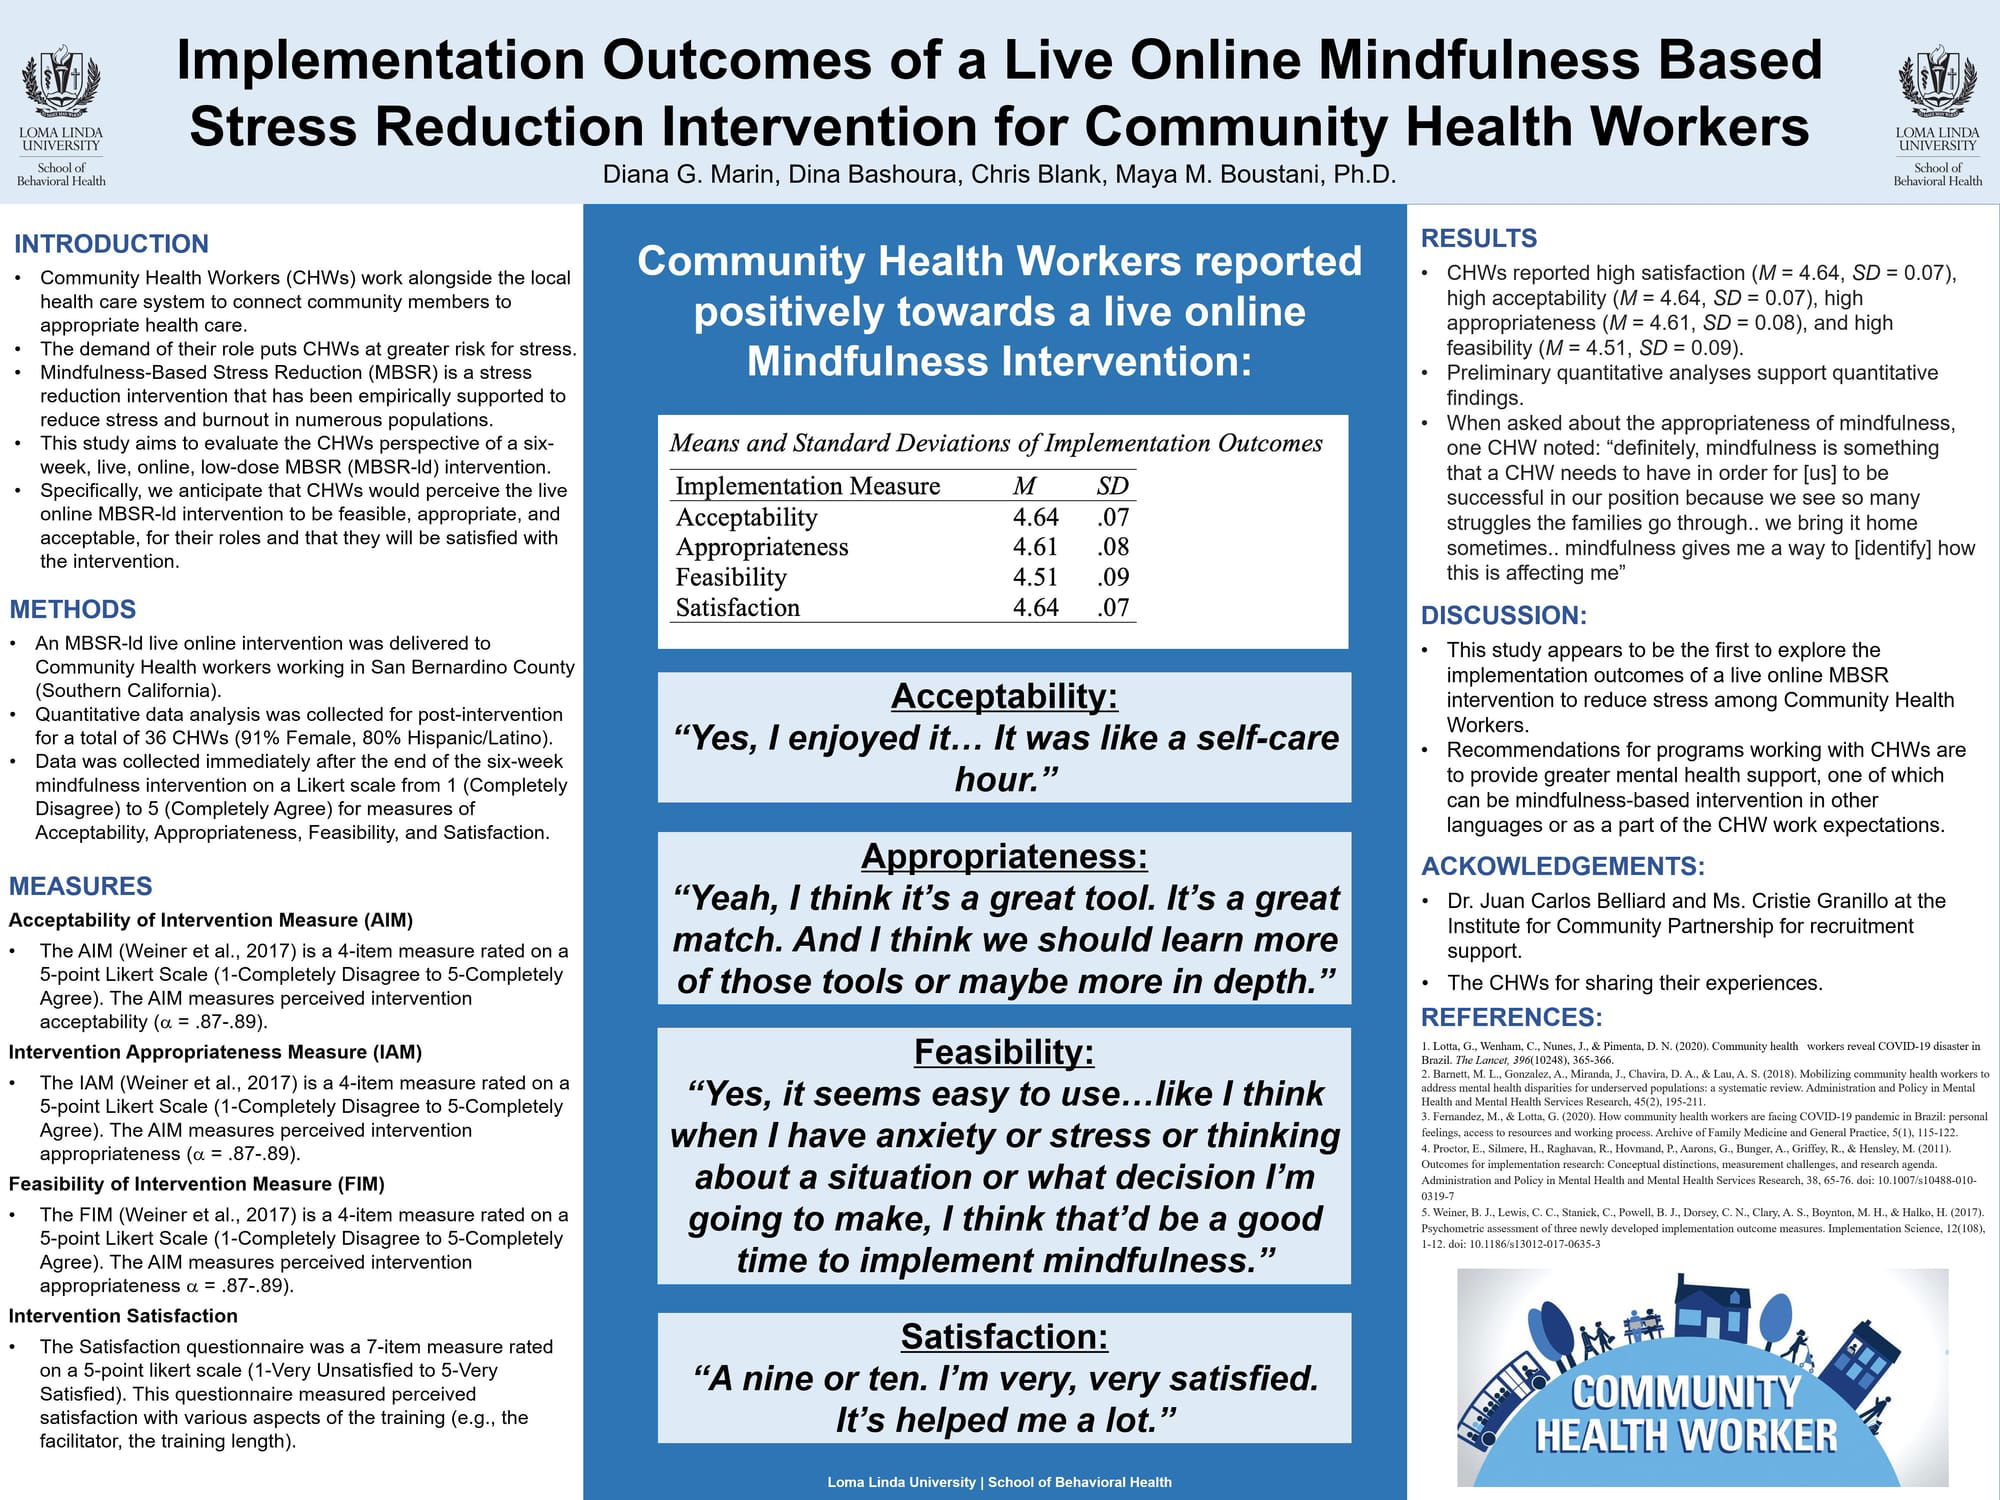 Implementation Outcomes of a Live Online Mindfulness Based Stress Reduction Intervention for Community Health Workers